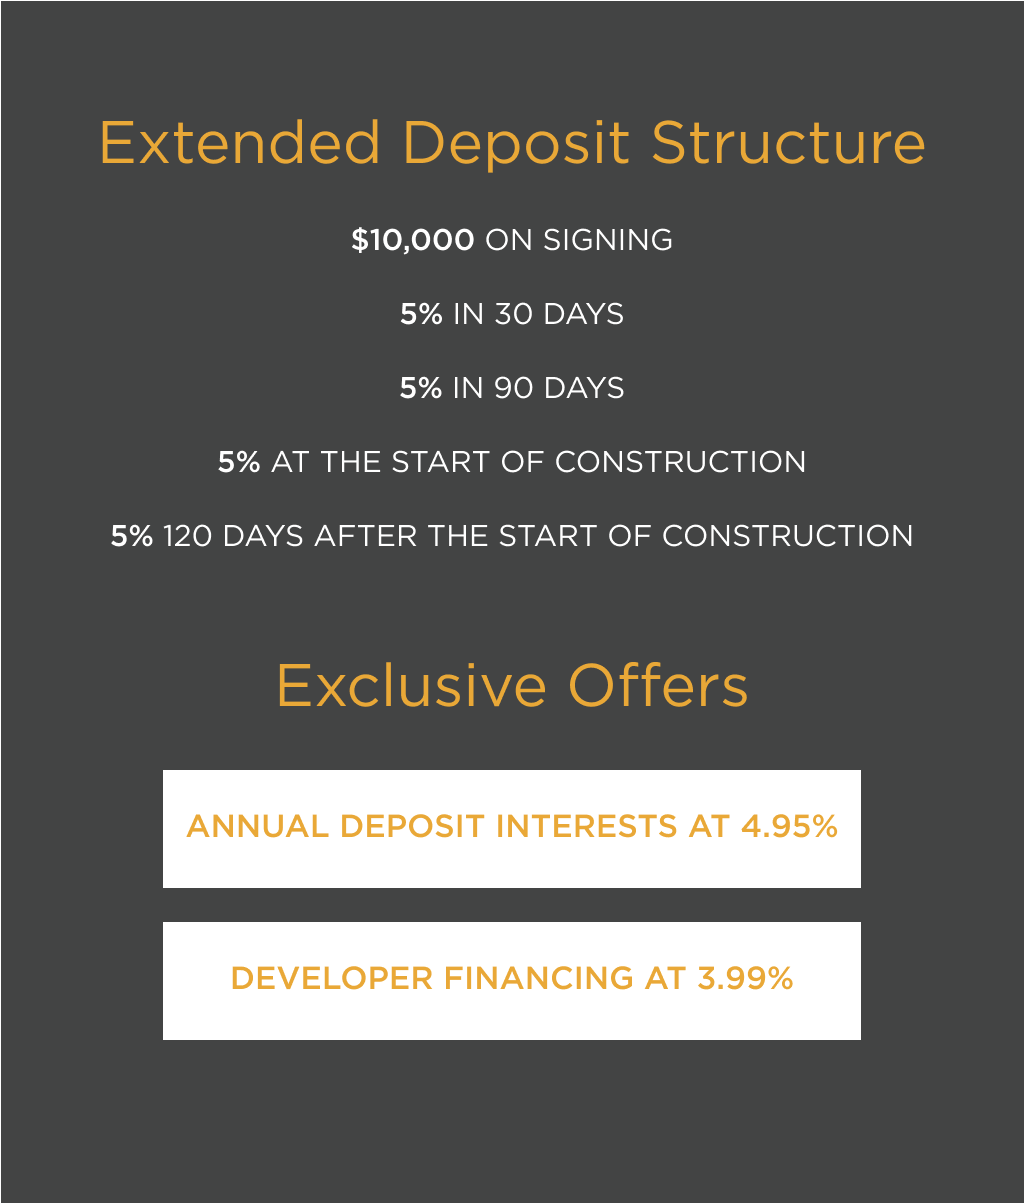 Extended Deposit Structure